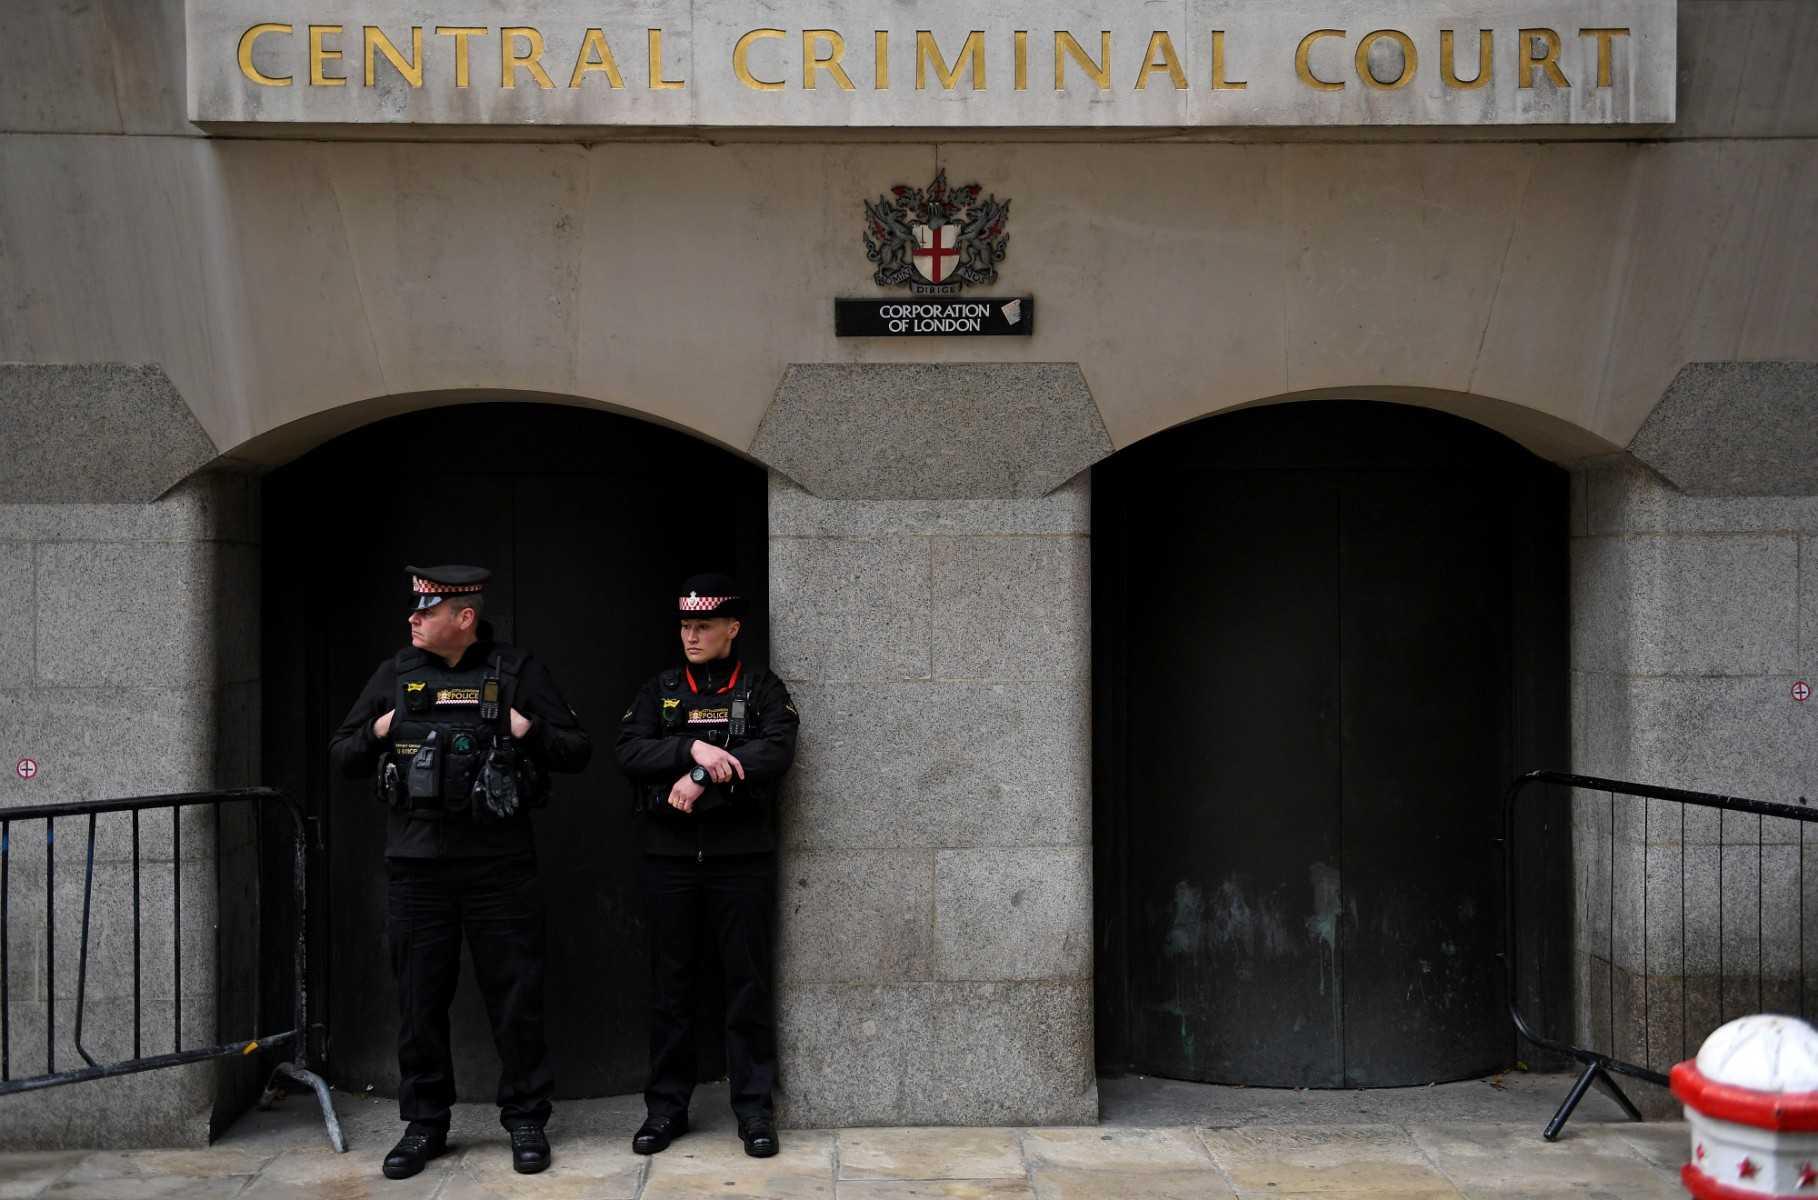 Police officers stand on duty outside the Old Bailey, England's Central Criminal Court, in London on Sept 30, 2021. Photo: Reuters